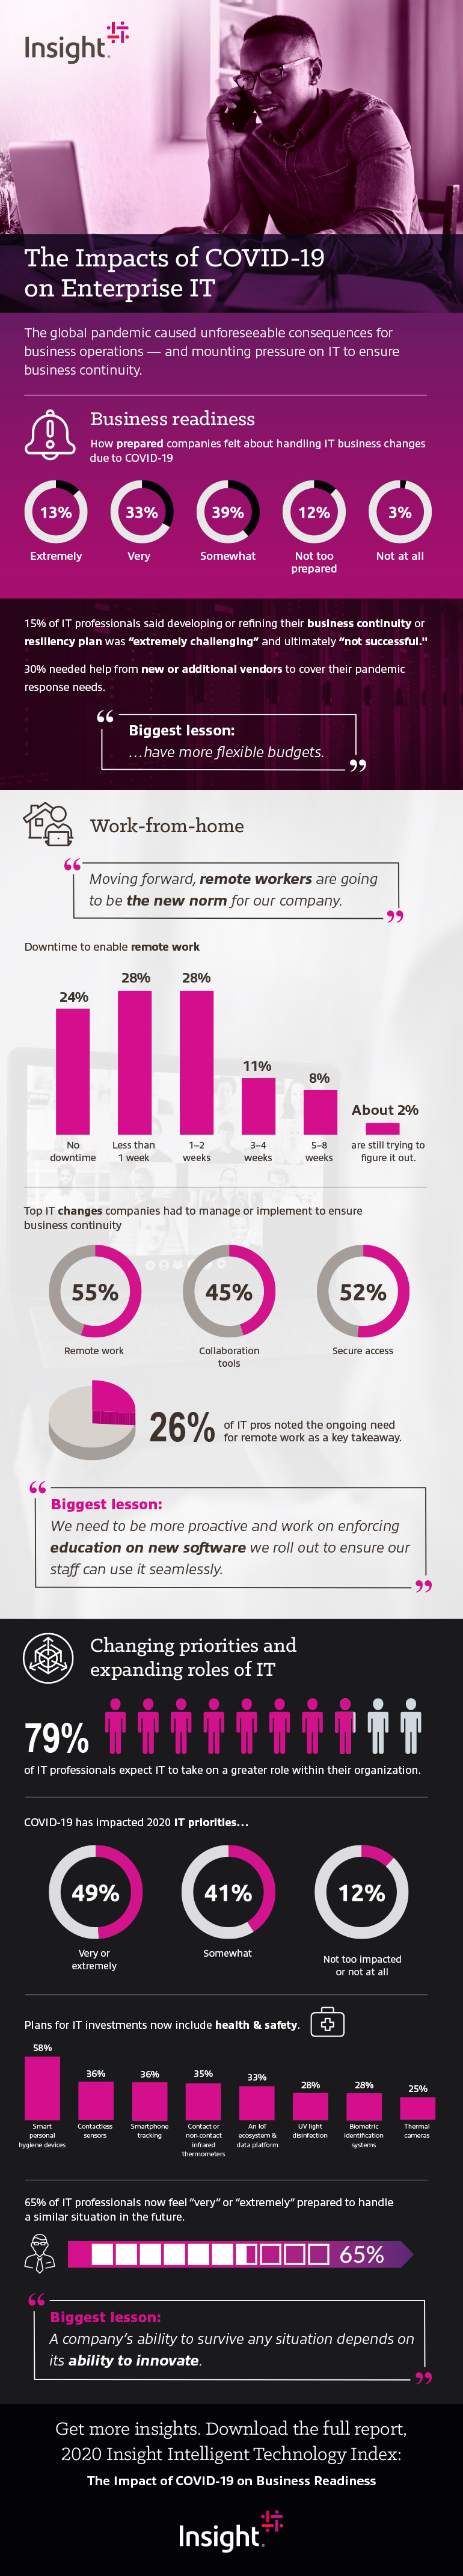 Impacts of COVID-19 on Enterprise IT infographic